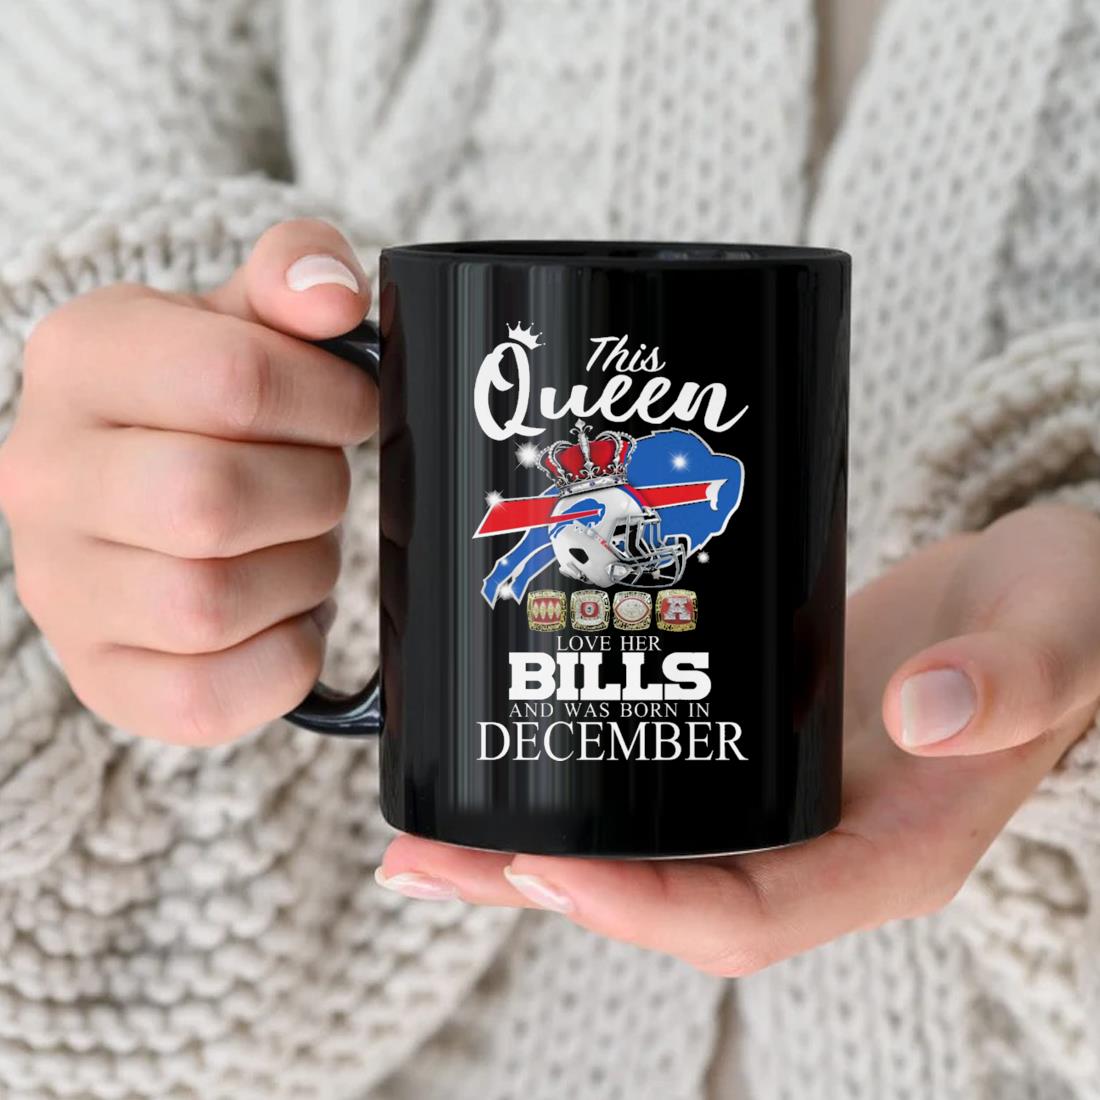 This Queen Love Her Bills And Was Born In December Mug nhu